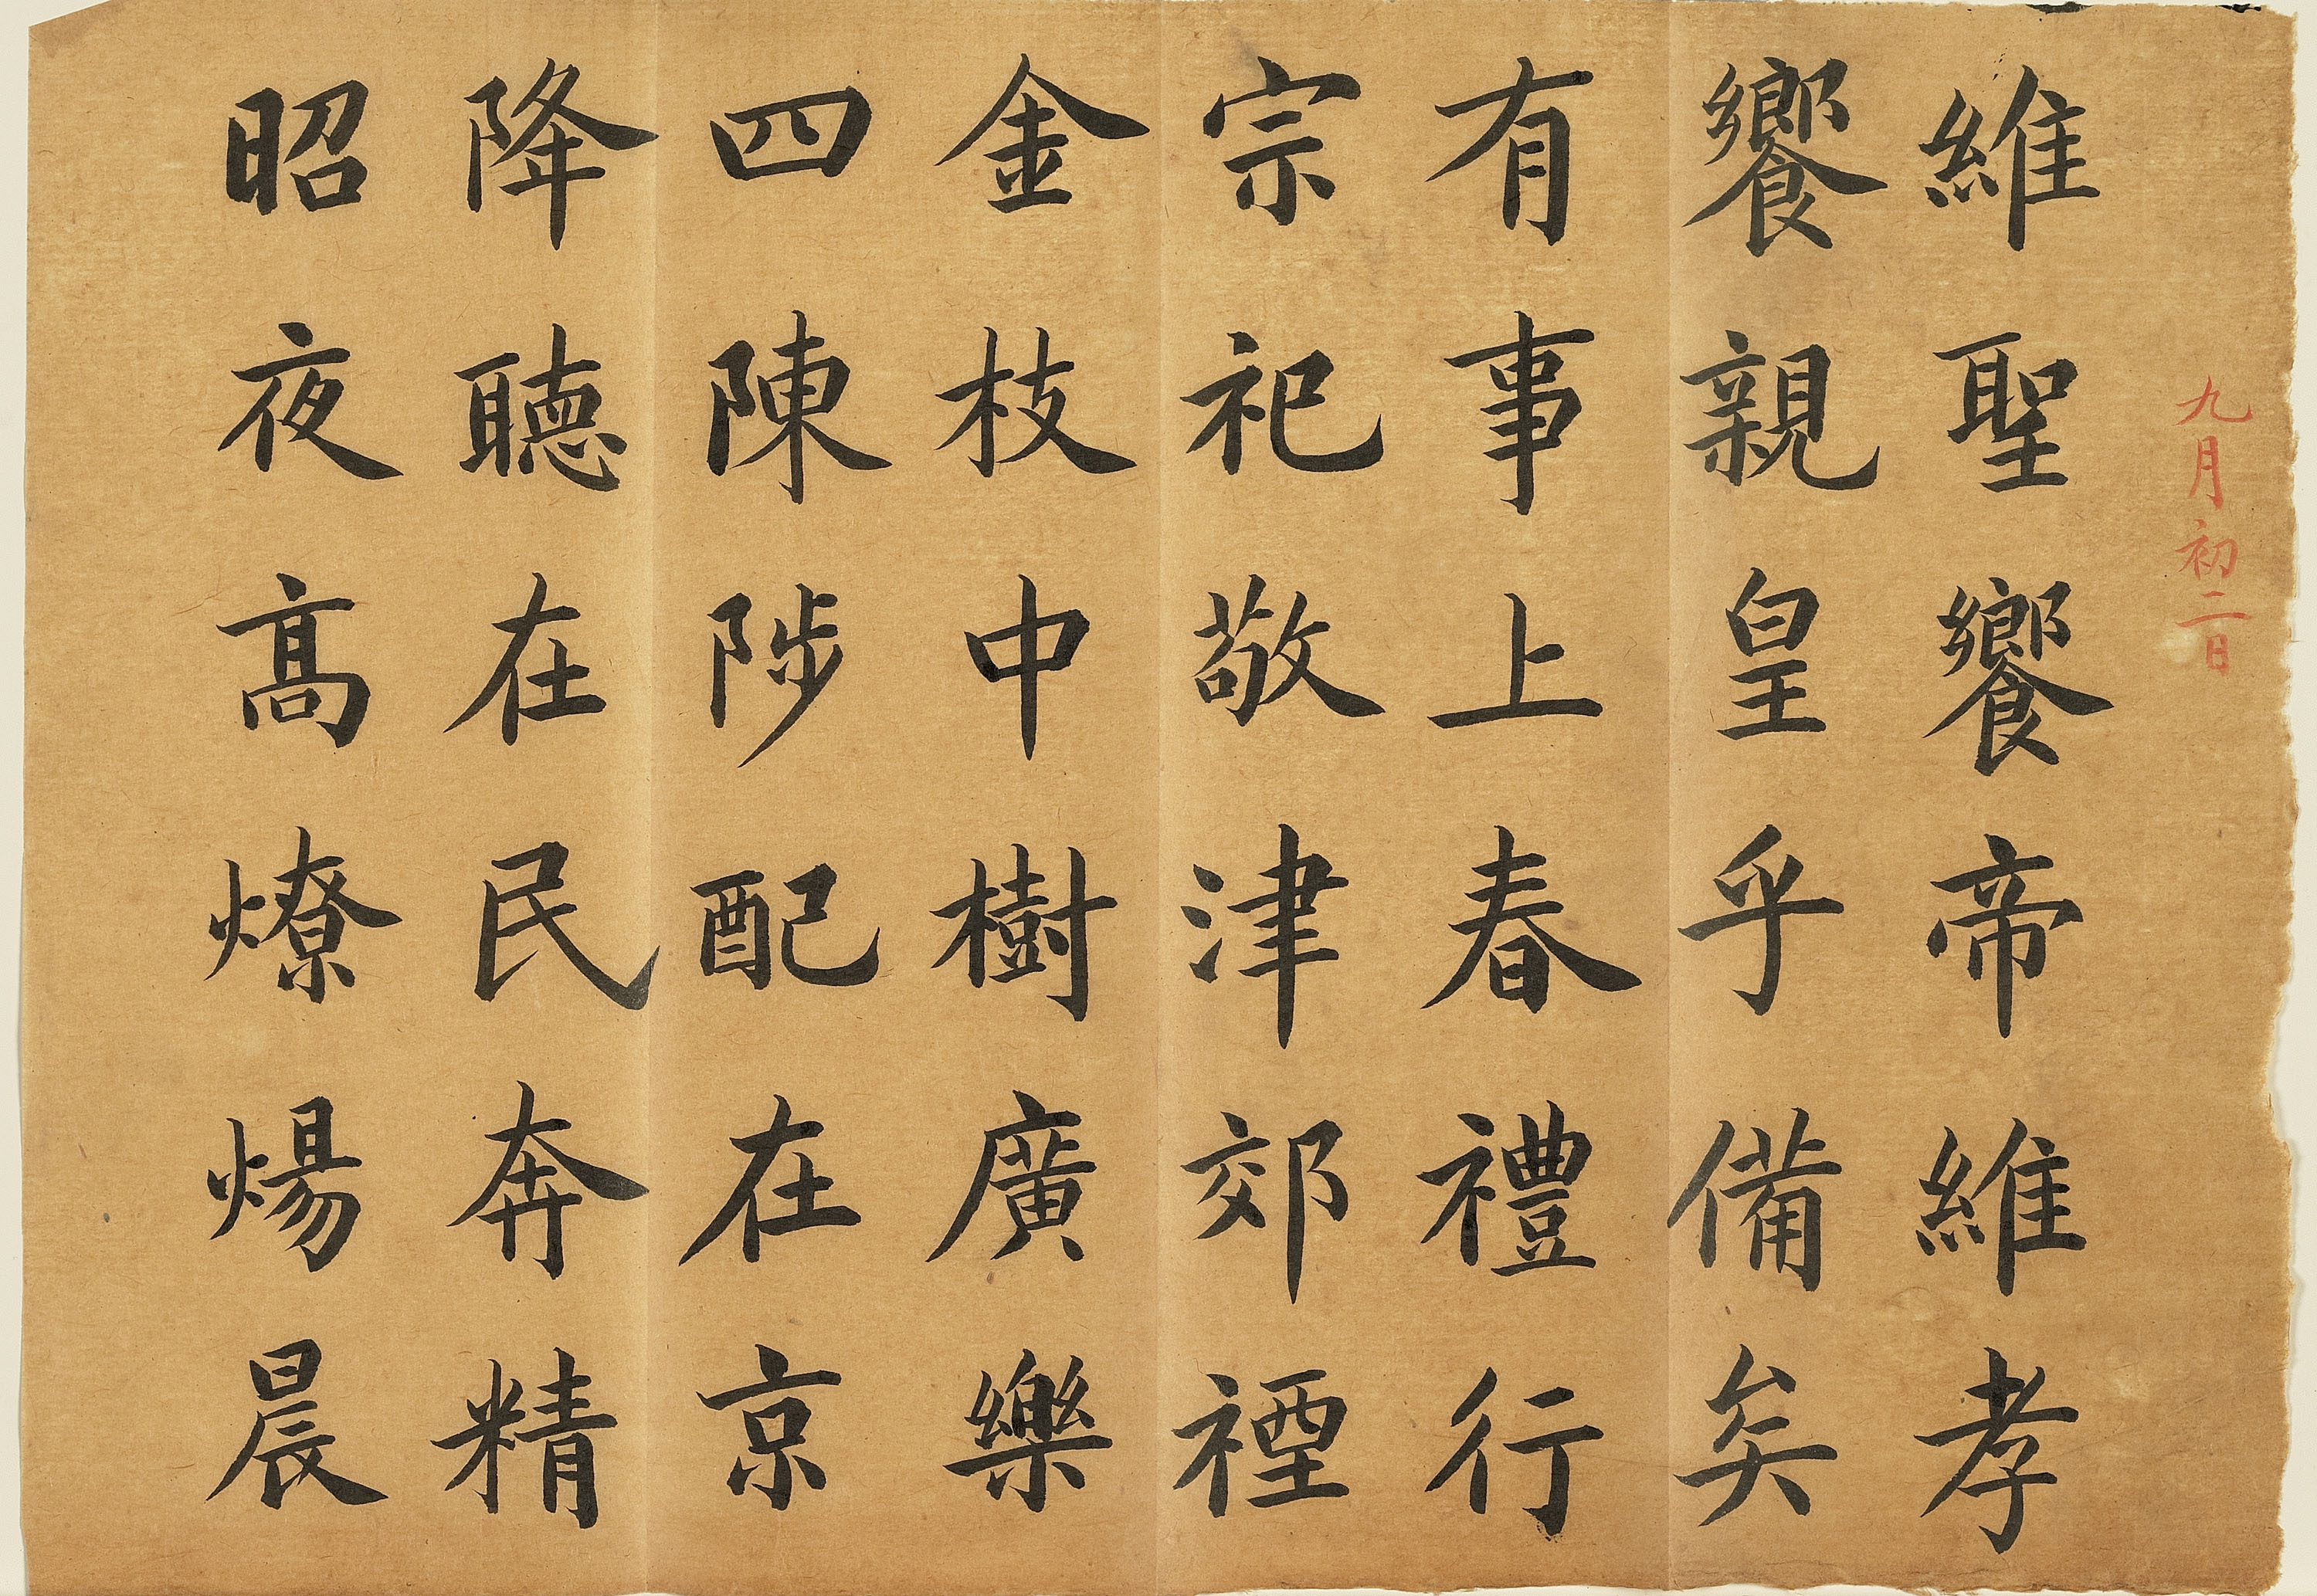 Imitating the calligraphy work of Southern dynasty writer Yan Yanzhi (e.g., Three Southern Suburb So